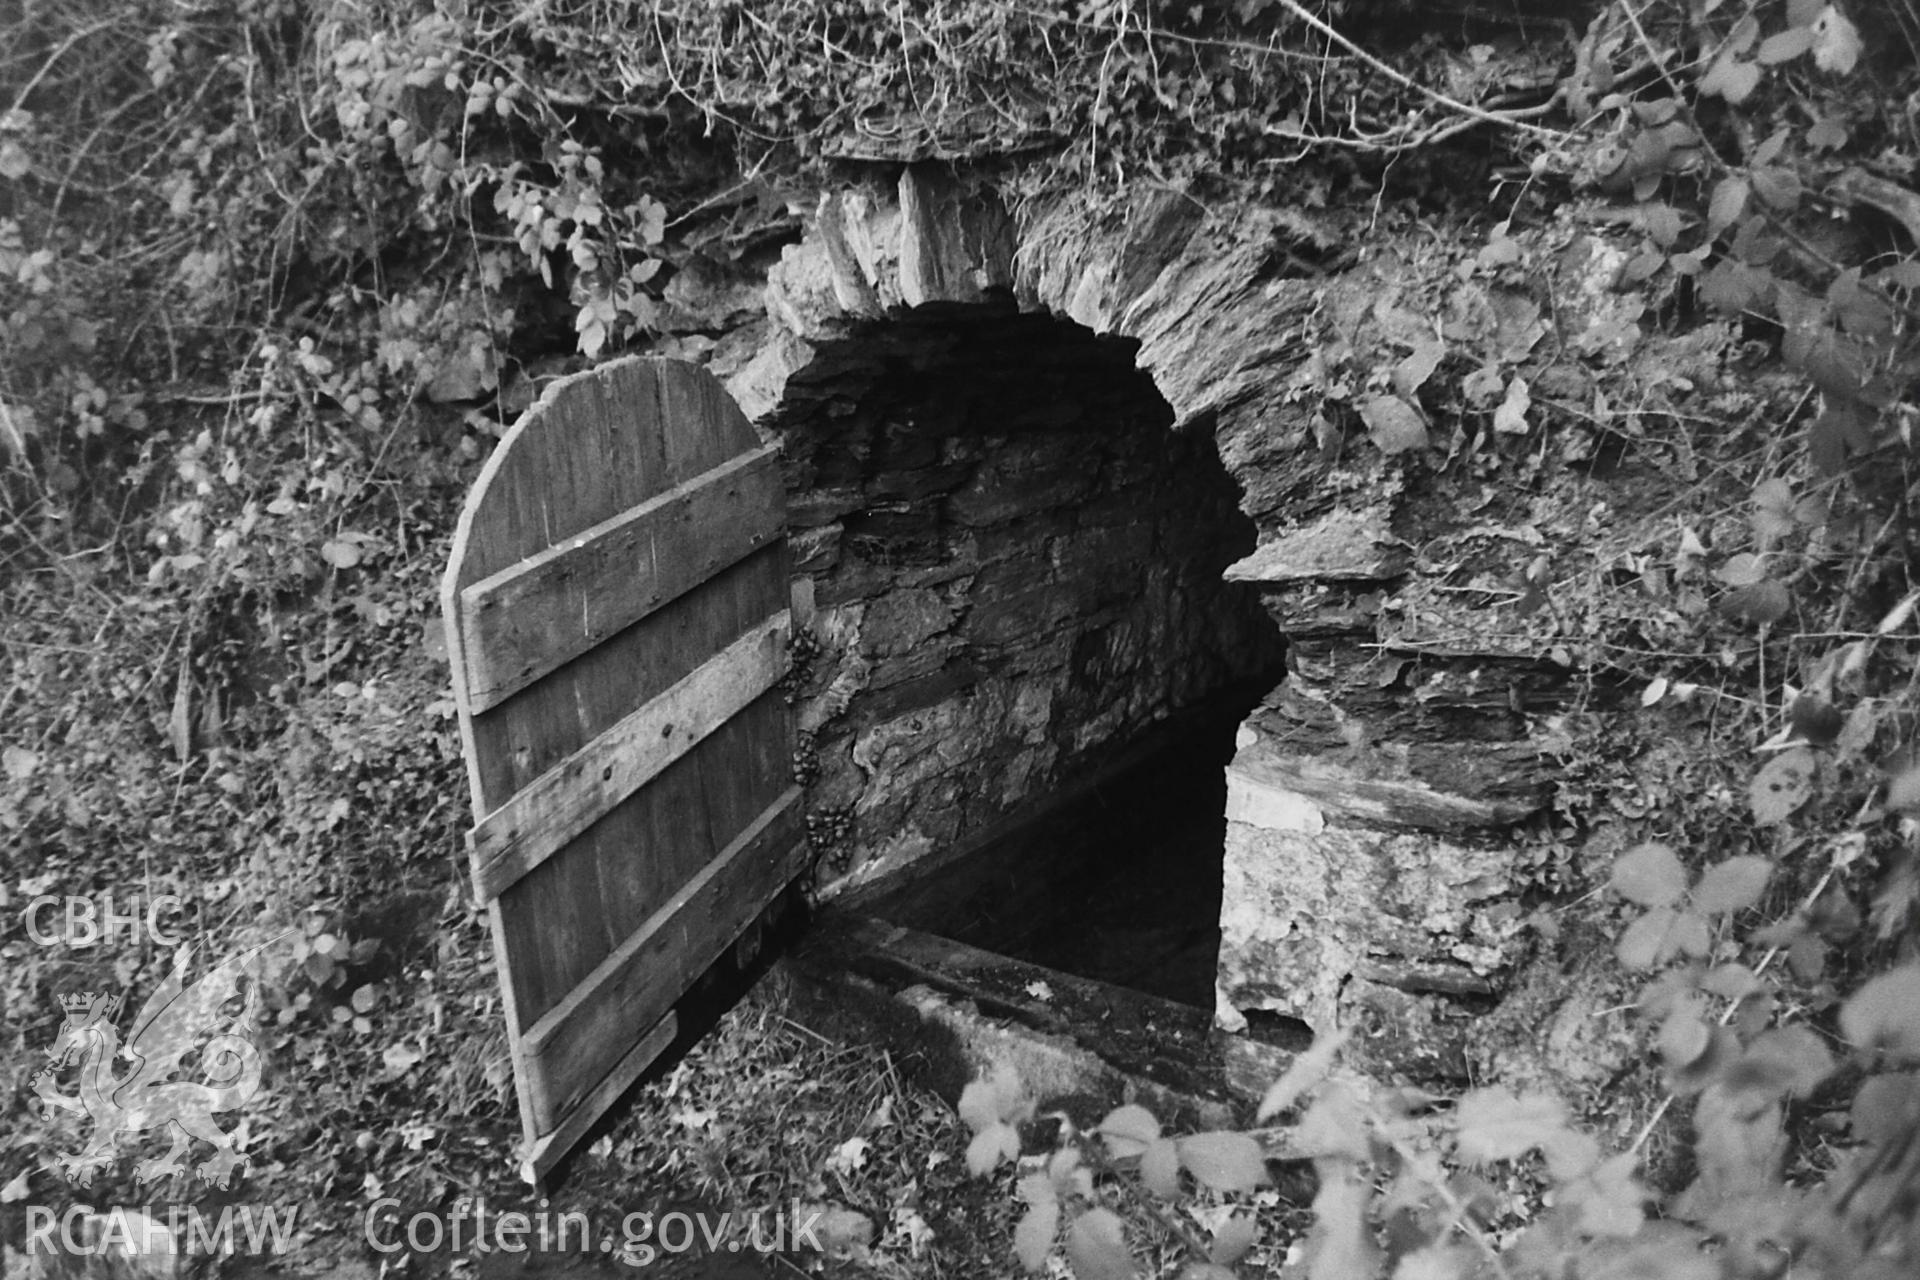 Black and white photo showing lead mine adit on Merlin's Hill, Abergwili, taken by Paul R. Davis, undated.